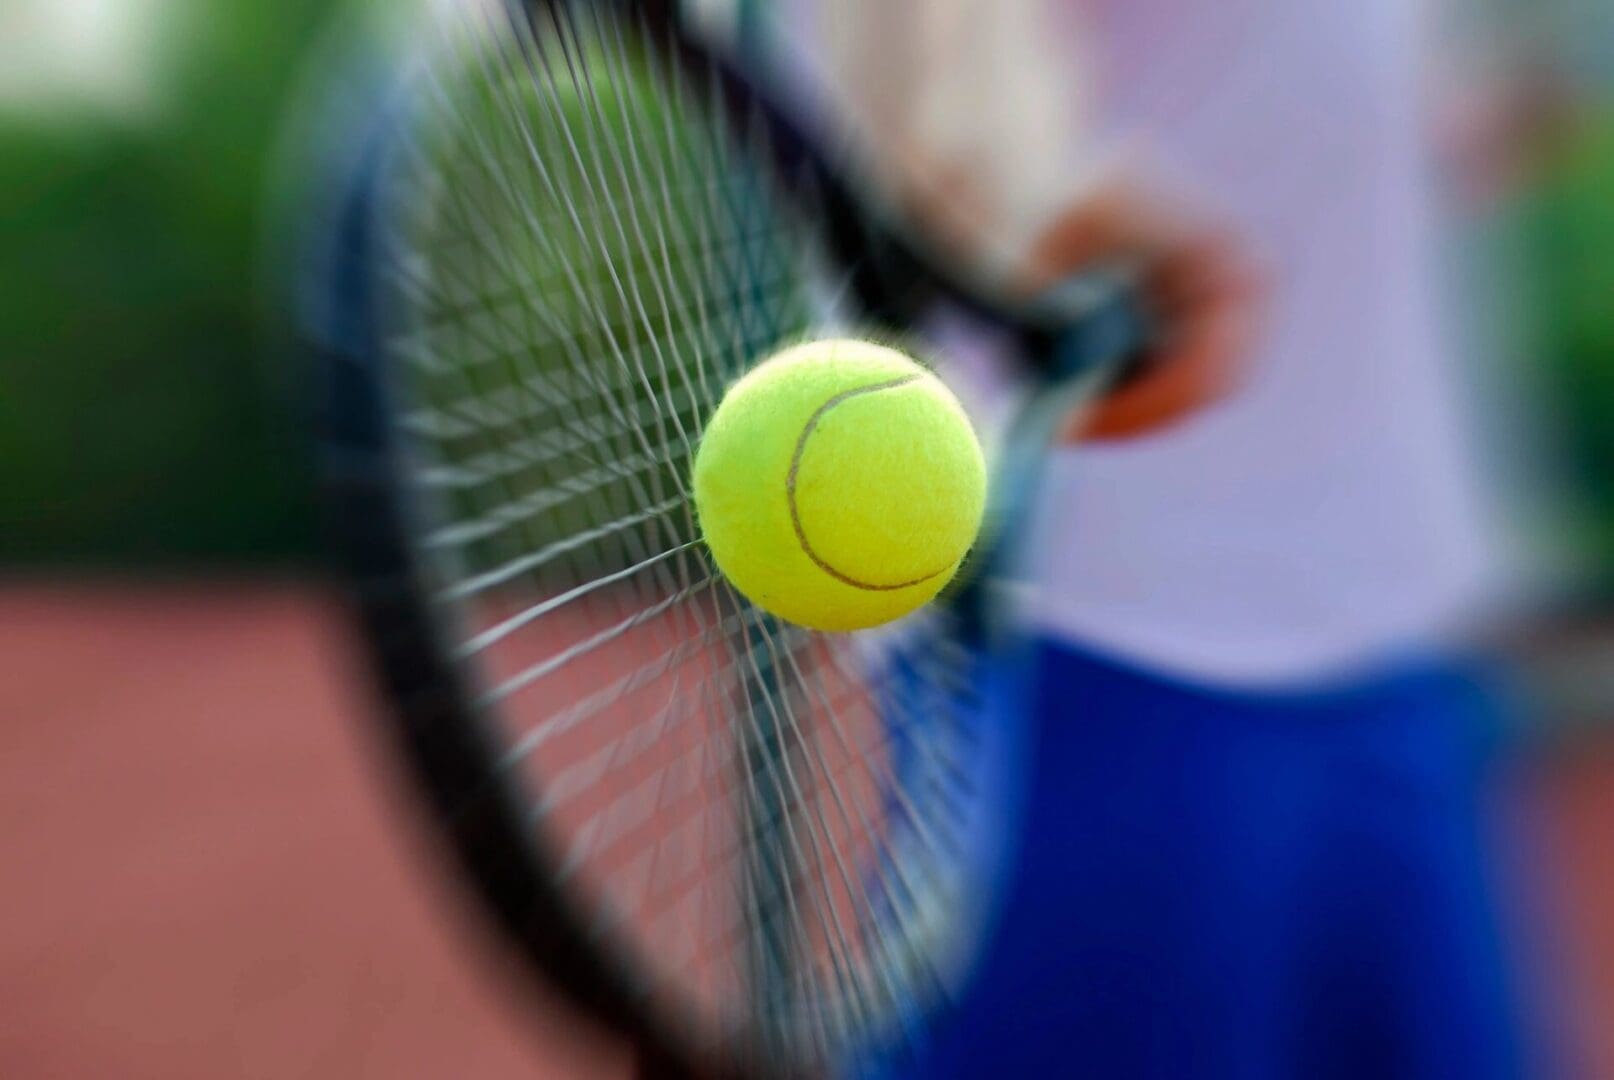 A person is holding a tennis racket and a ball.